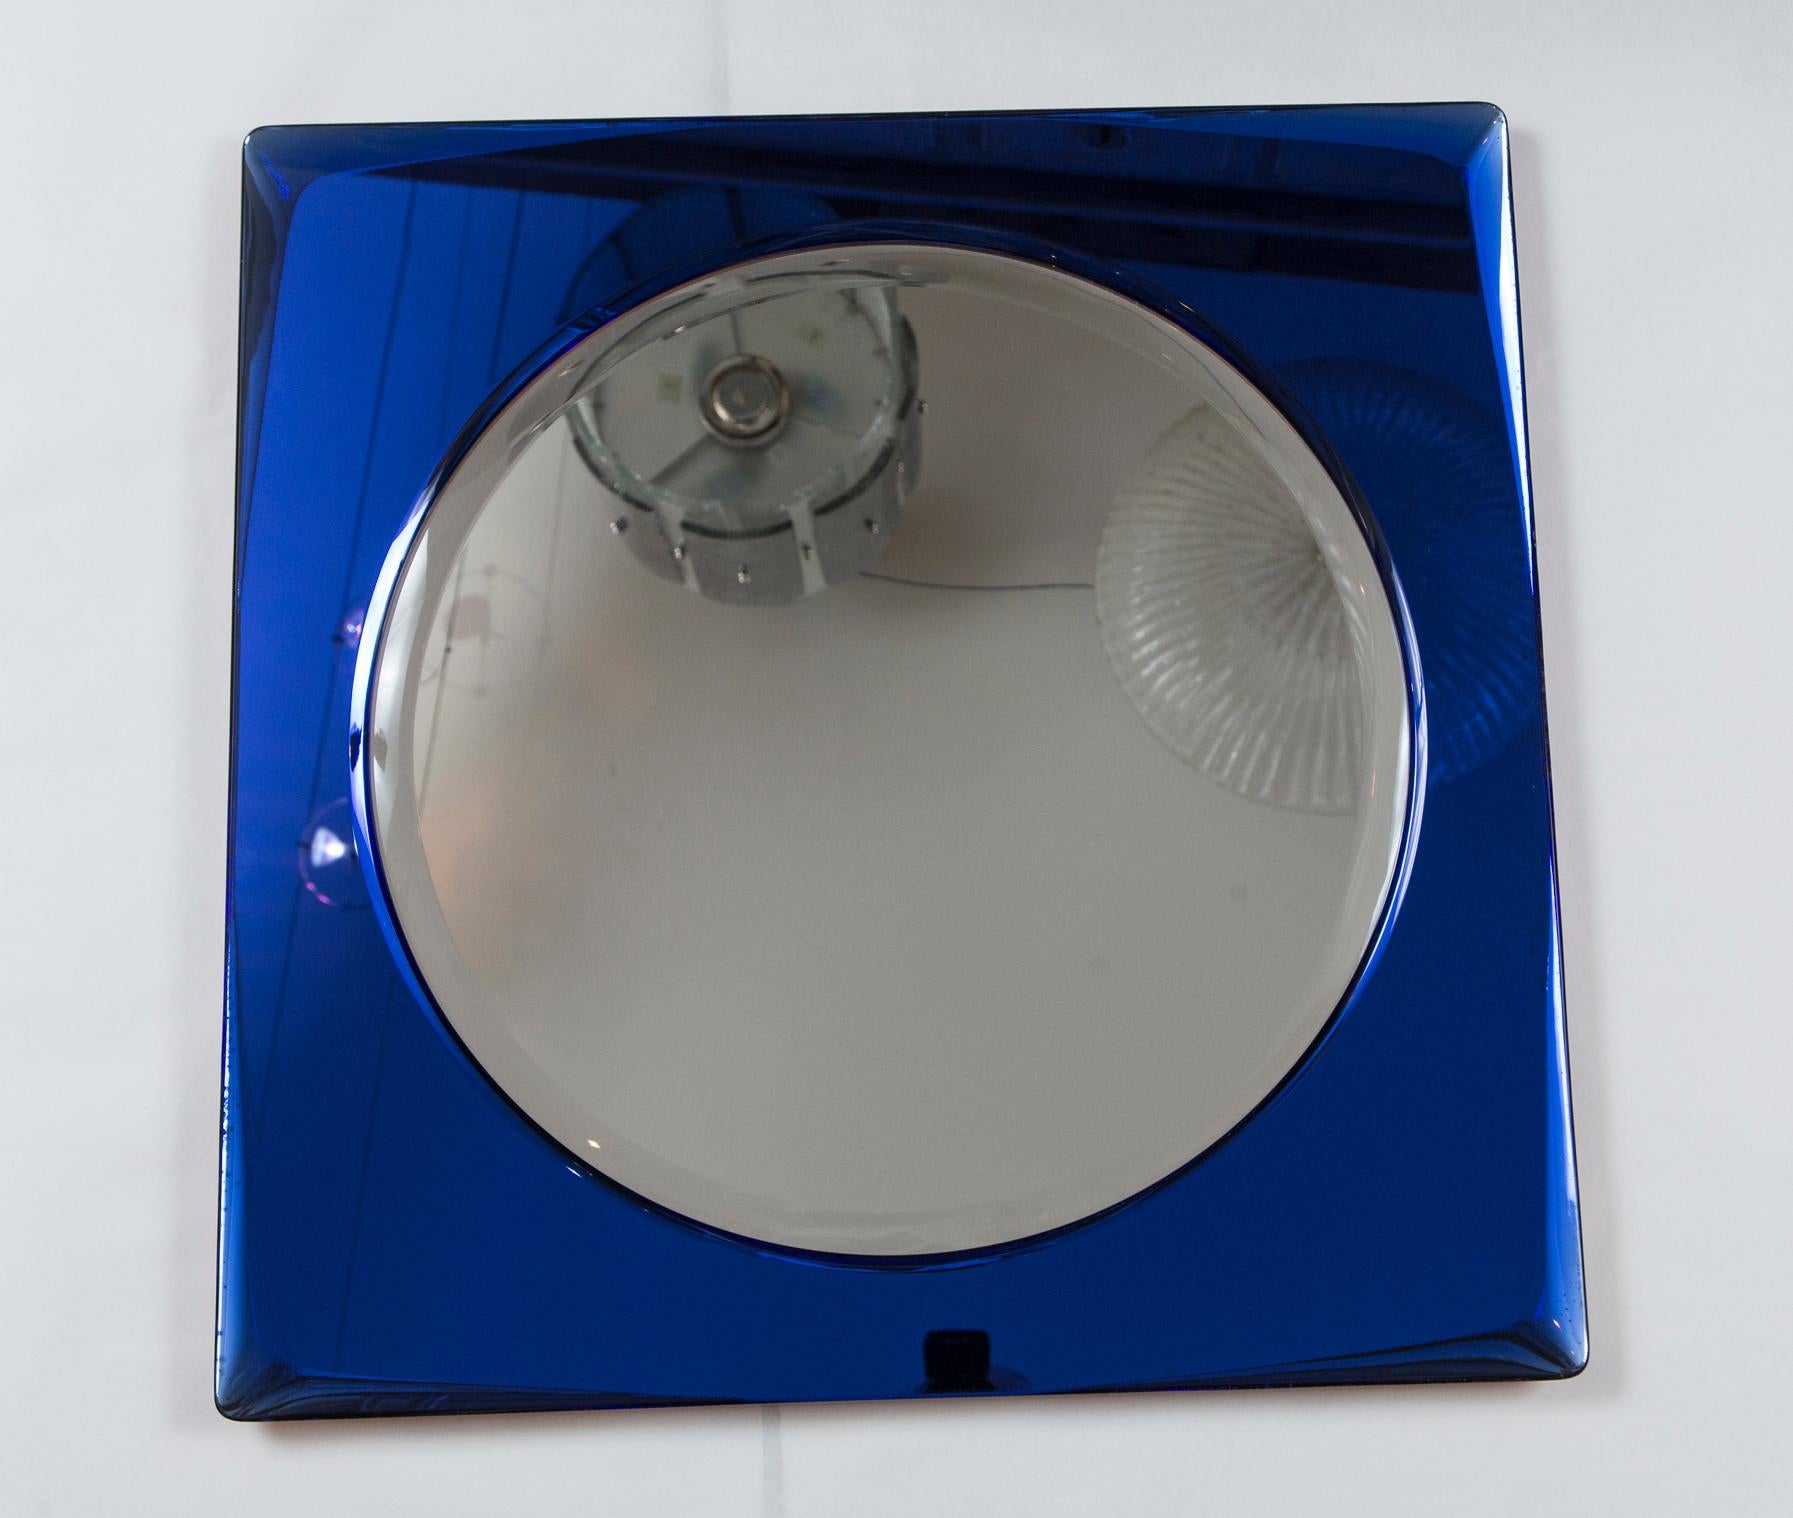 Brilliant cobalt blue glass colored square shaped framed mirror, note both the frame and the looking glass are beveled
Designer: Attribution Cristale Arte
Dating: circa 1950-1959
Origin: Italy
Condition: Excellent original condition
Dimensions: